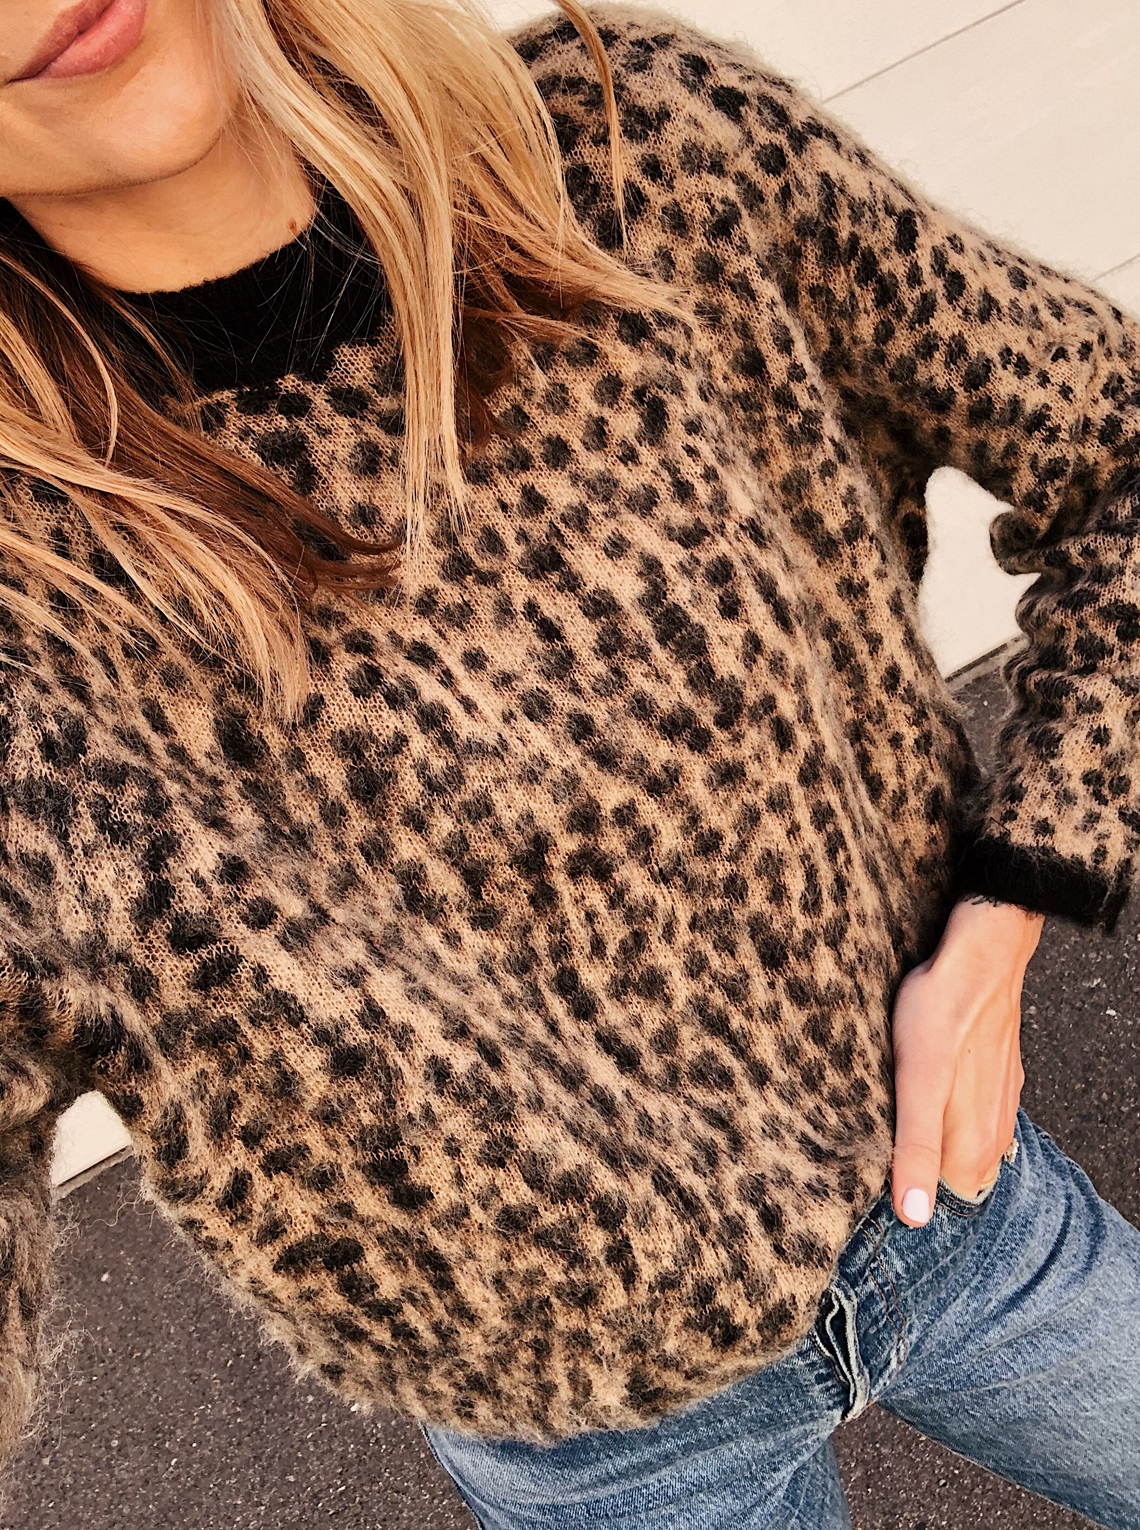 & Other Stories Leopard Sweater